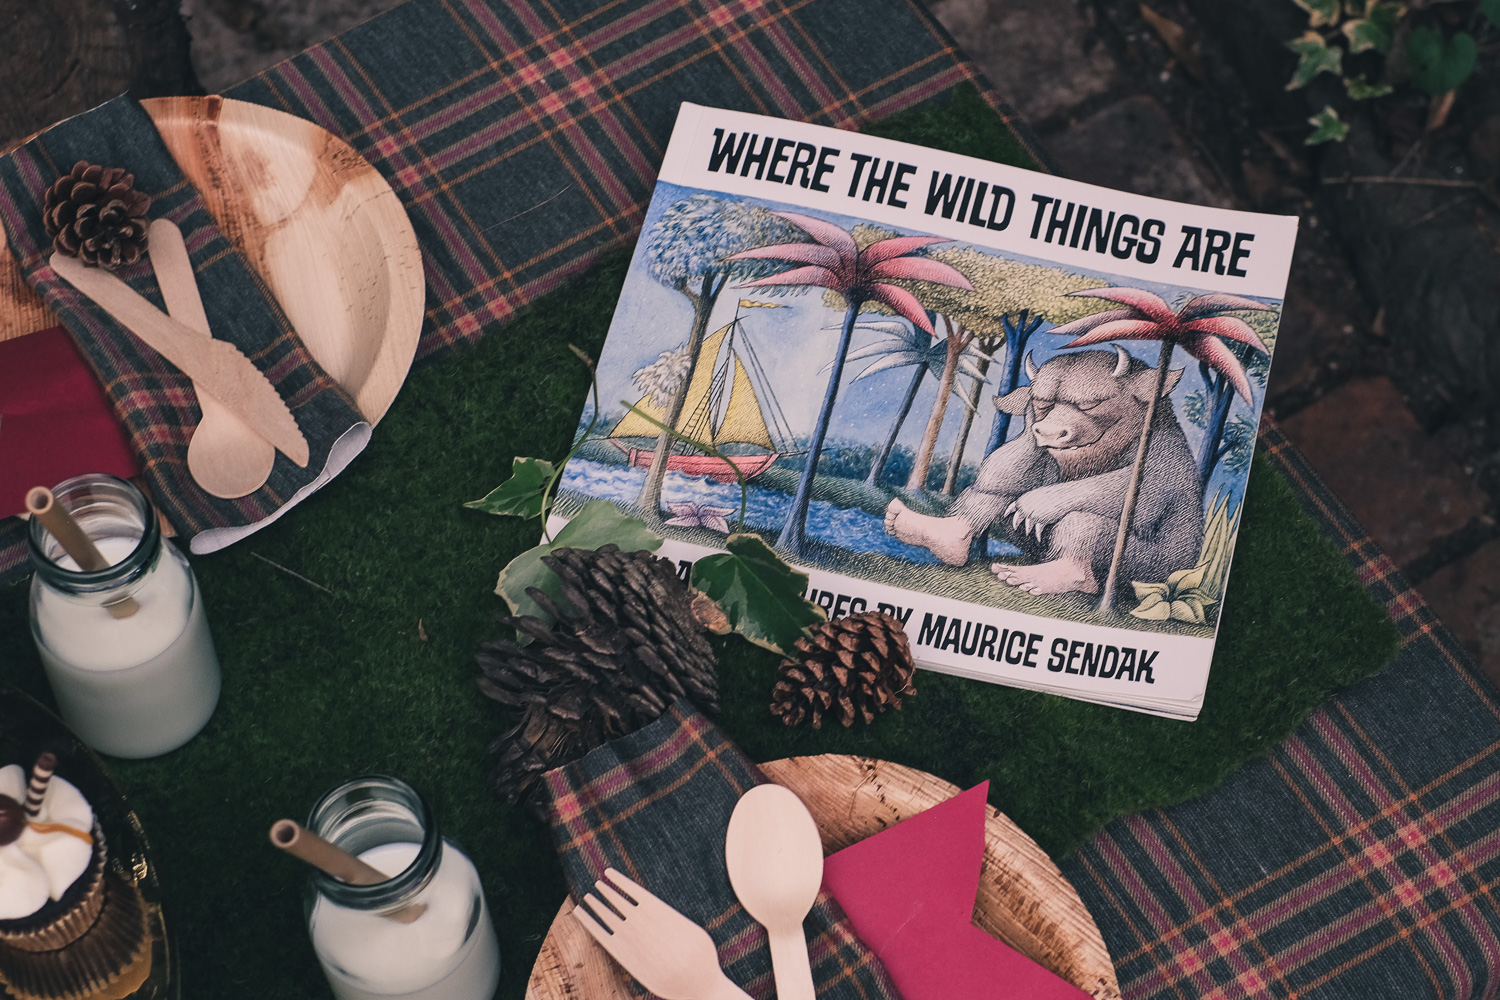 Book Where The Wild Things Are by Maurice Sendak on birthday party table